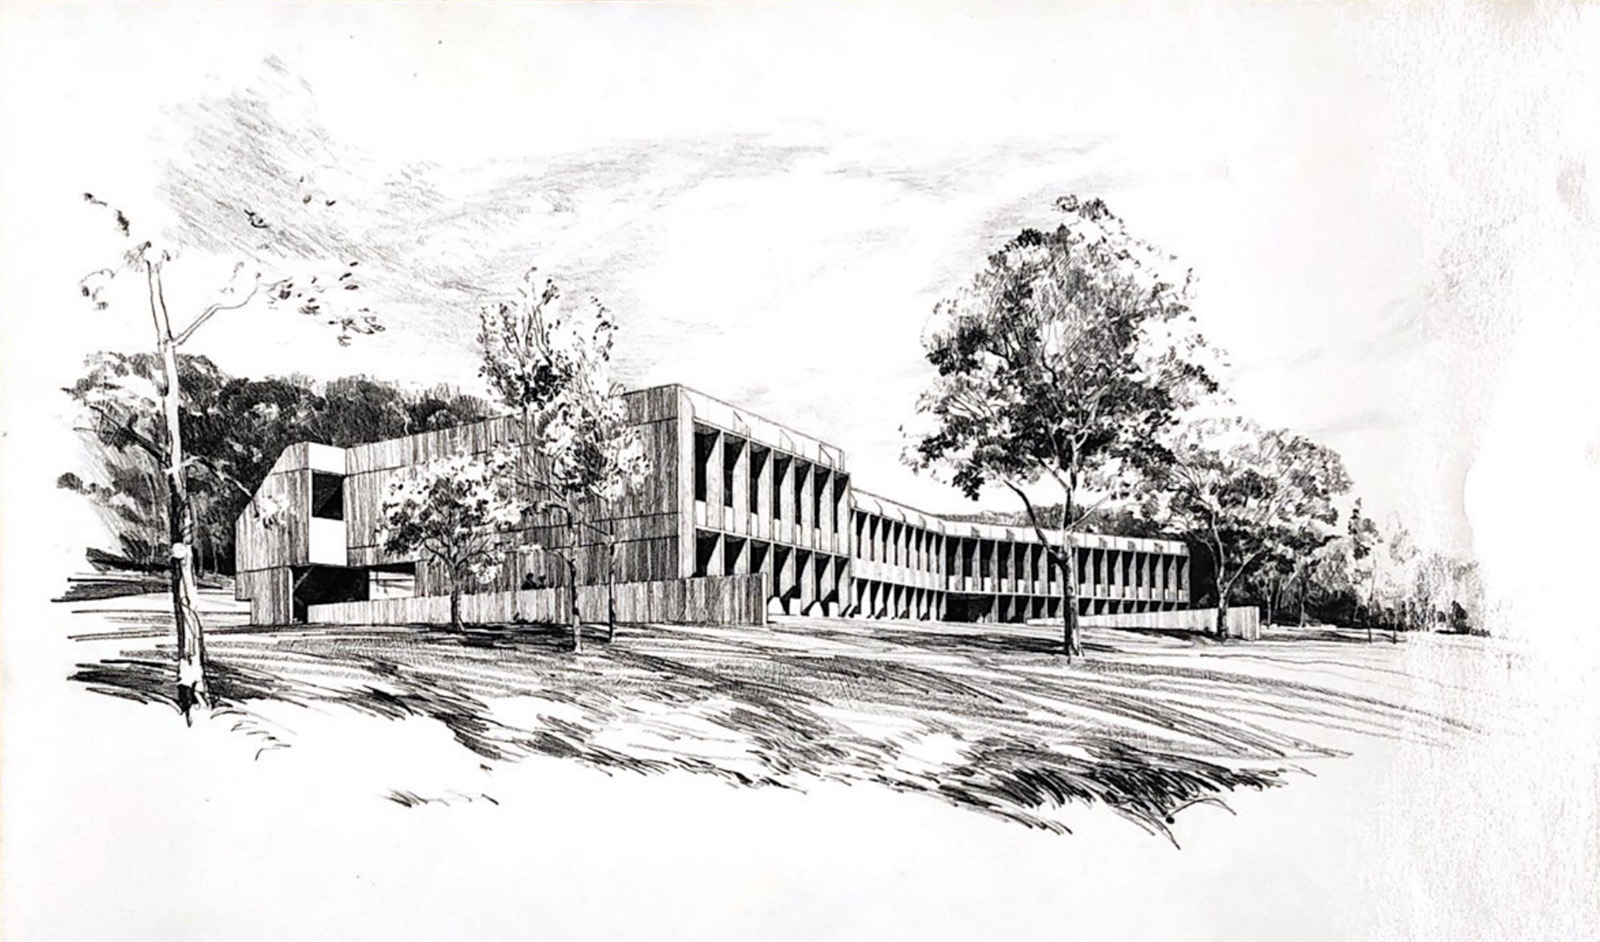 Drawing of the old API building designed by Marcel Breuer